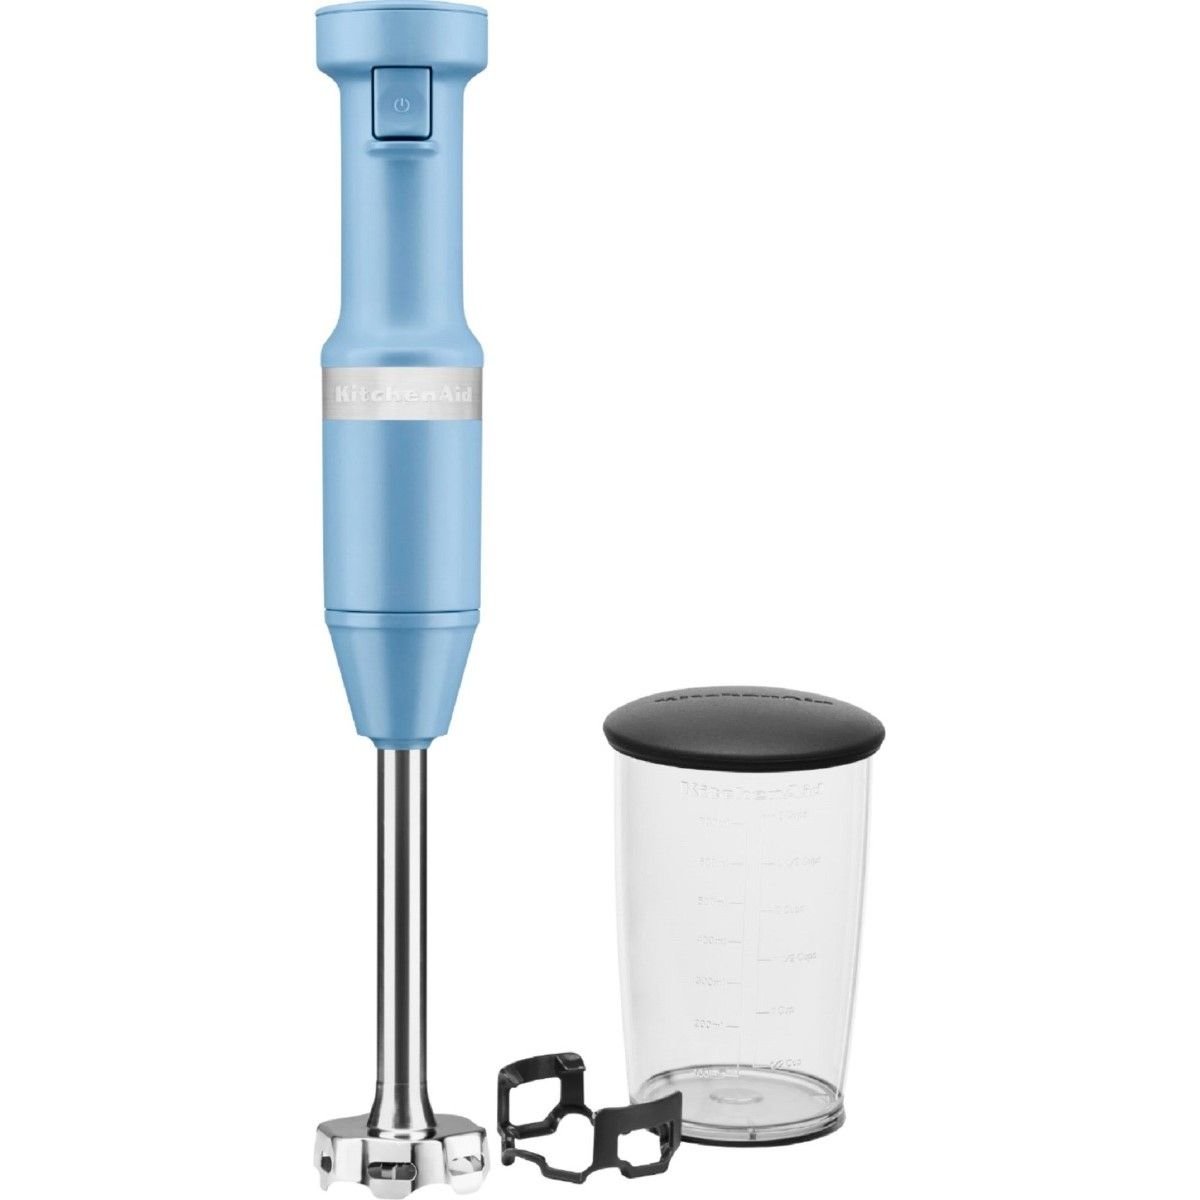 Breville Hand Blenders - for Smoothies, Milkshakes, Cocktails and Soups 